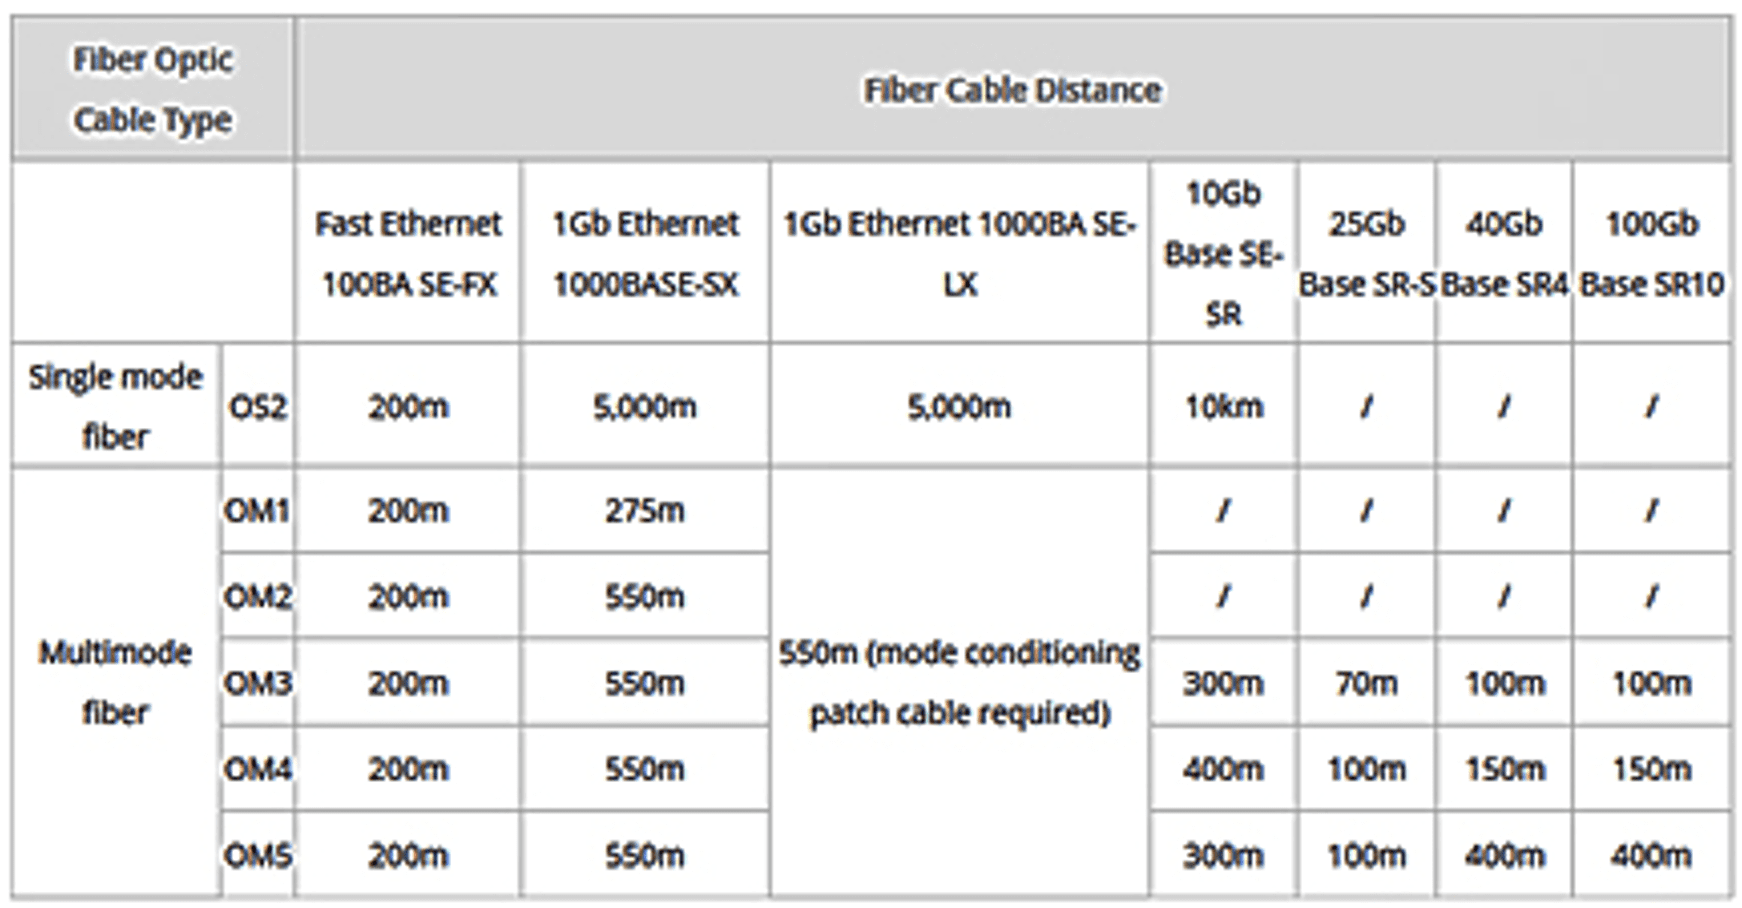 Fiber optic cable distance table